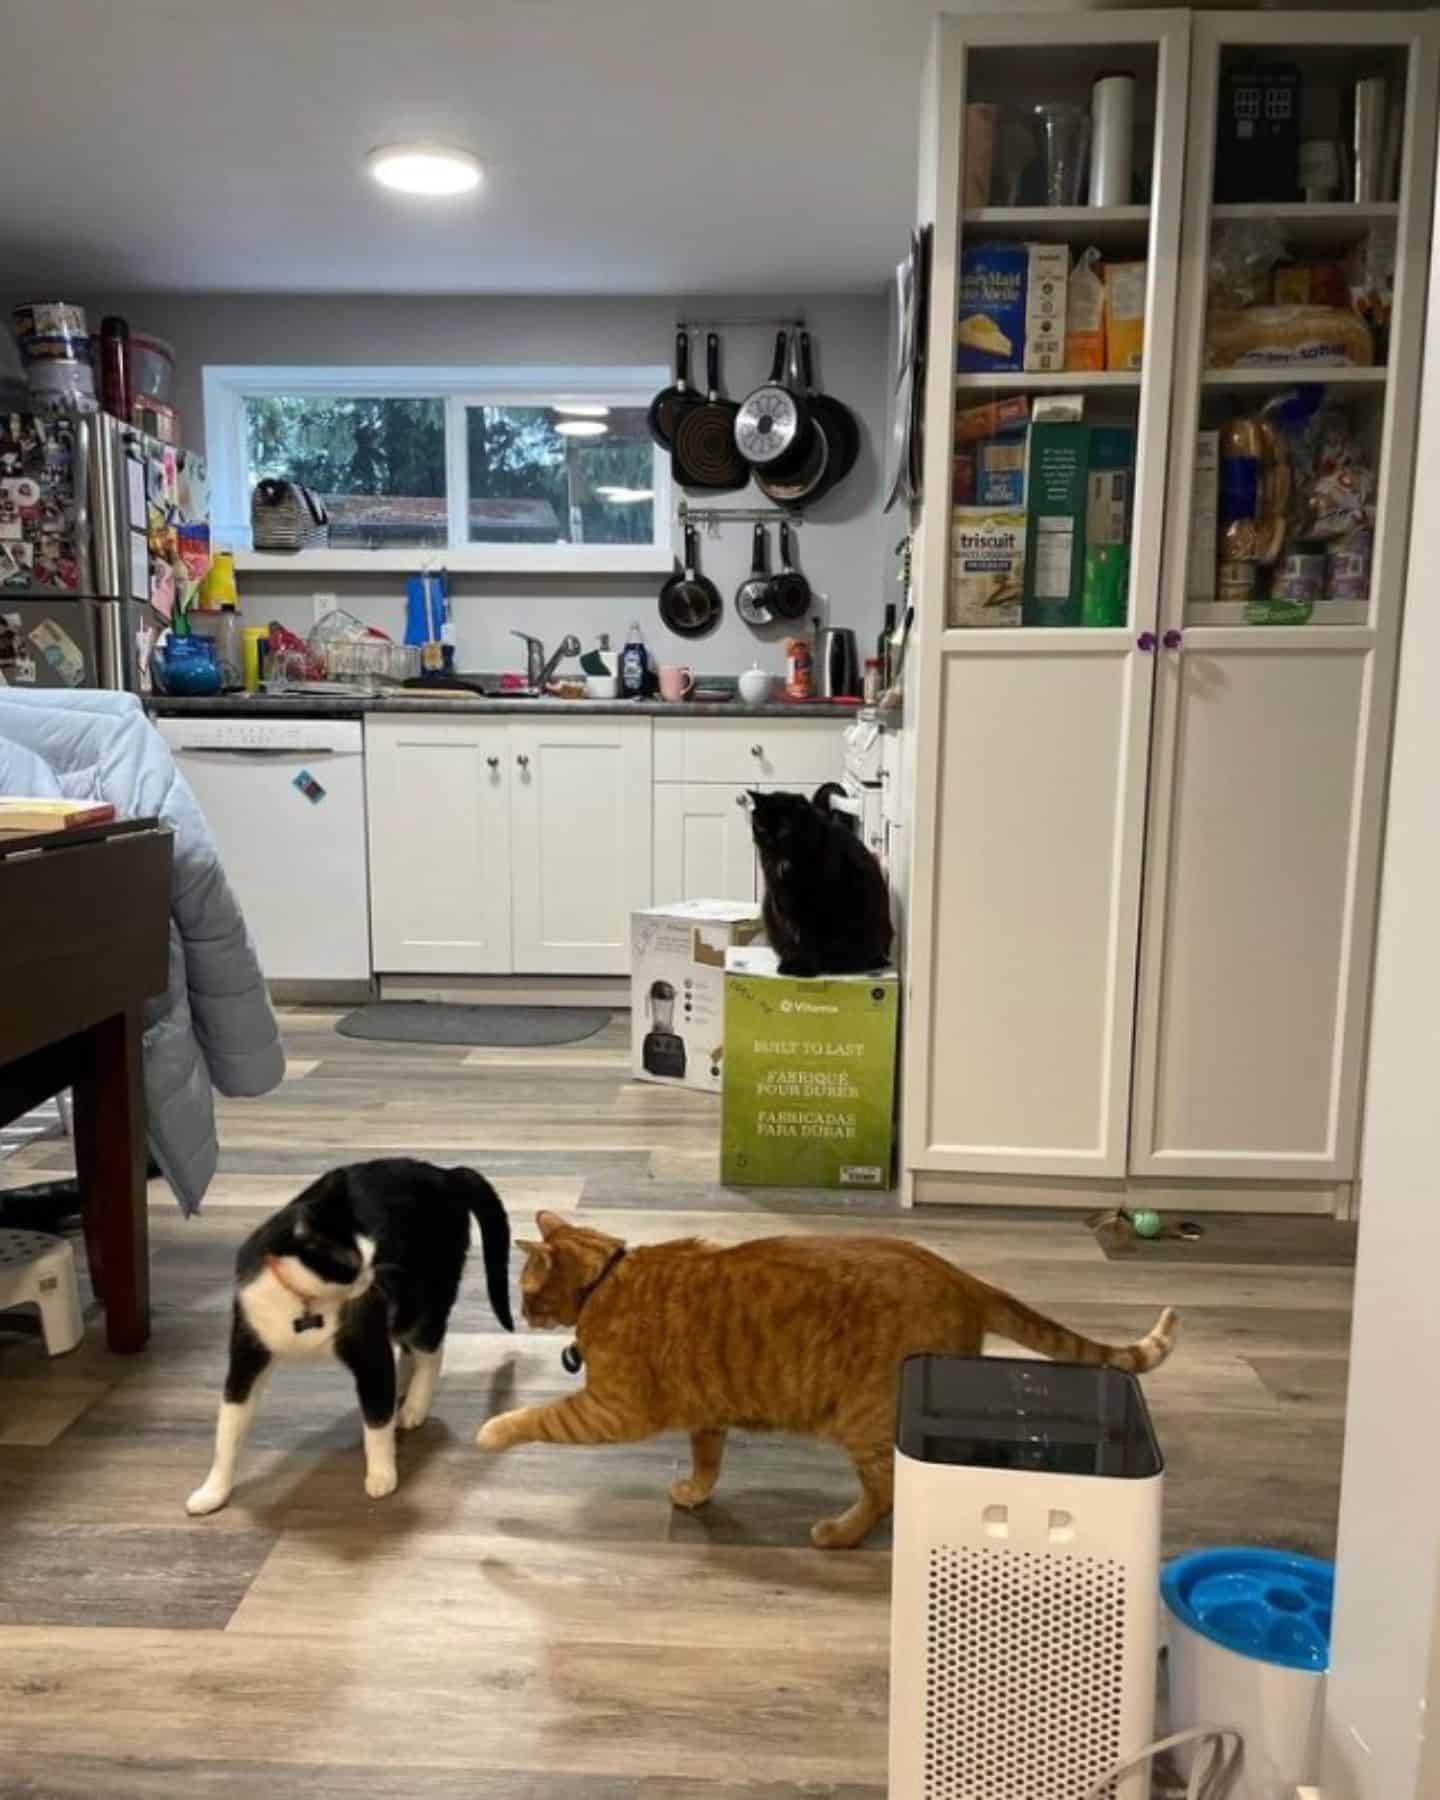 cats playing in the kitchen